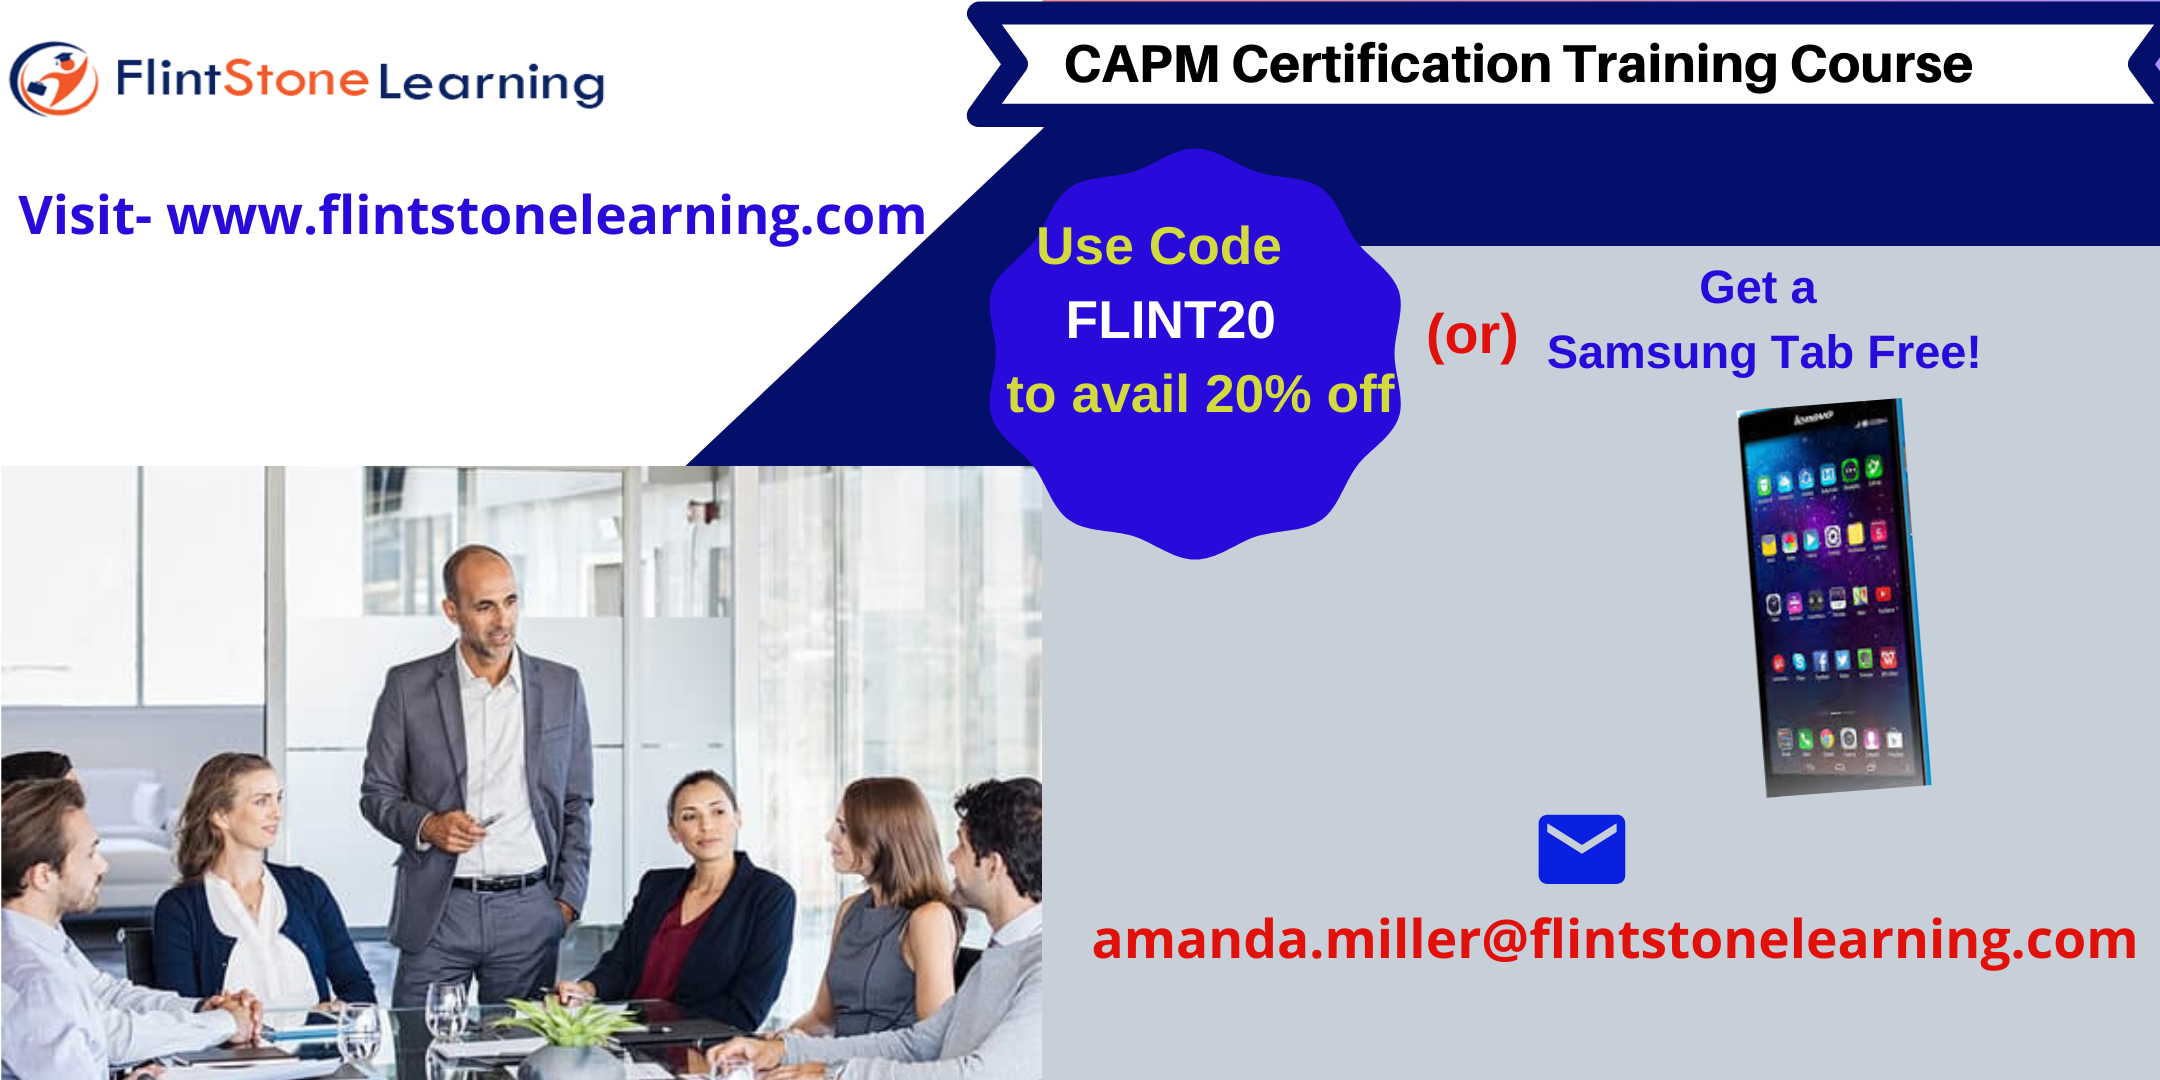 CAPM Certification Training Course in West Covina, CA